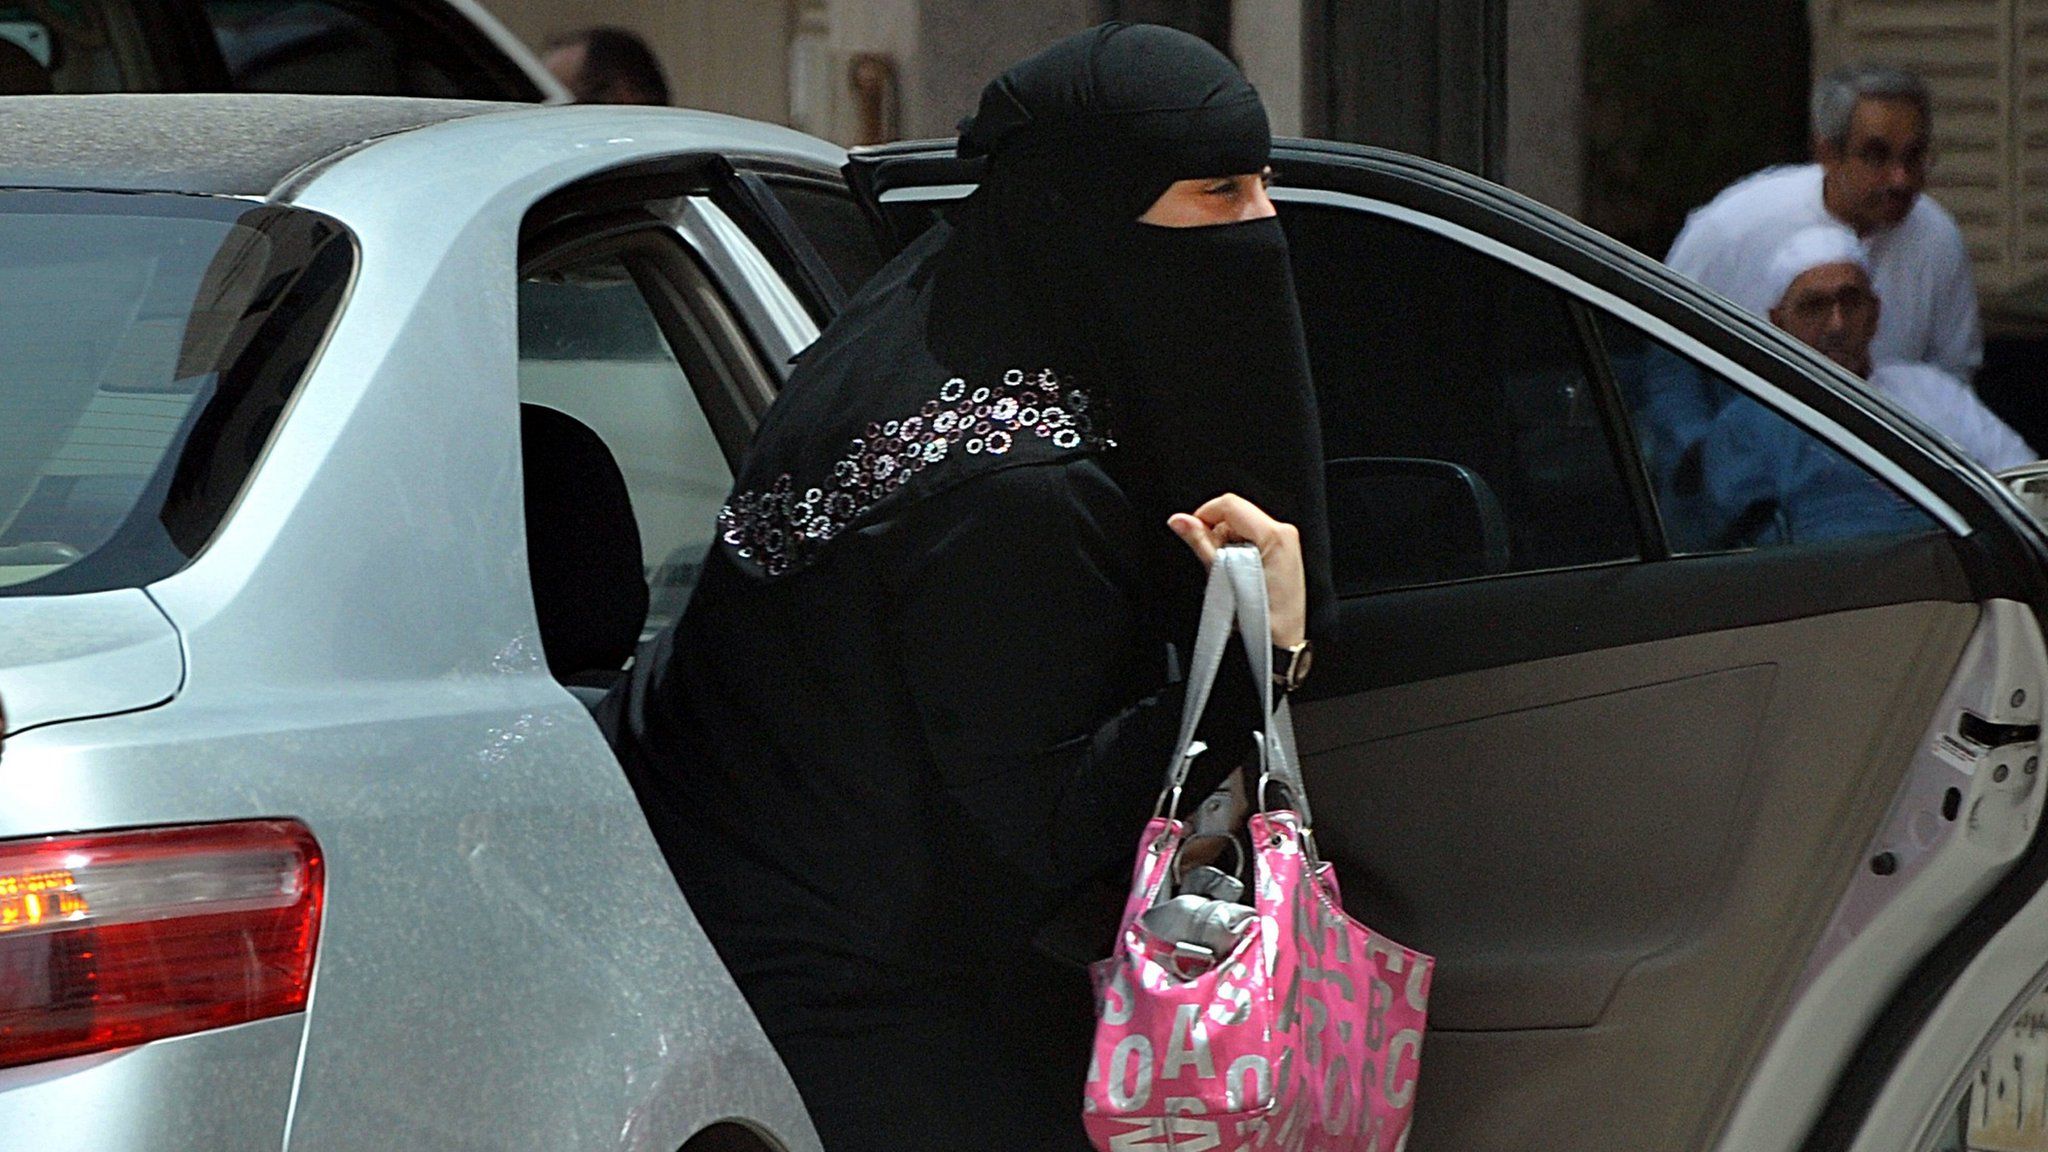 A Saudi woman gets out of a car after being given a ride by her driver in Riyadh on 26 May, 2011